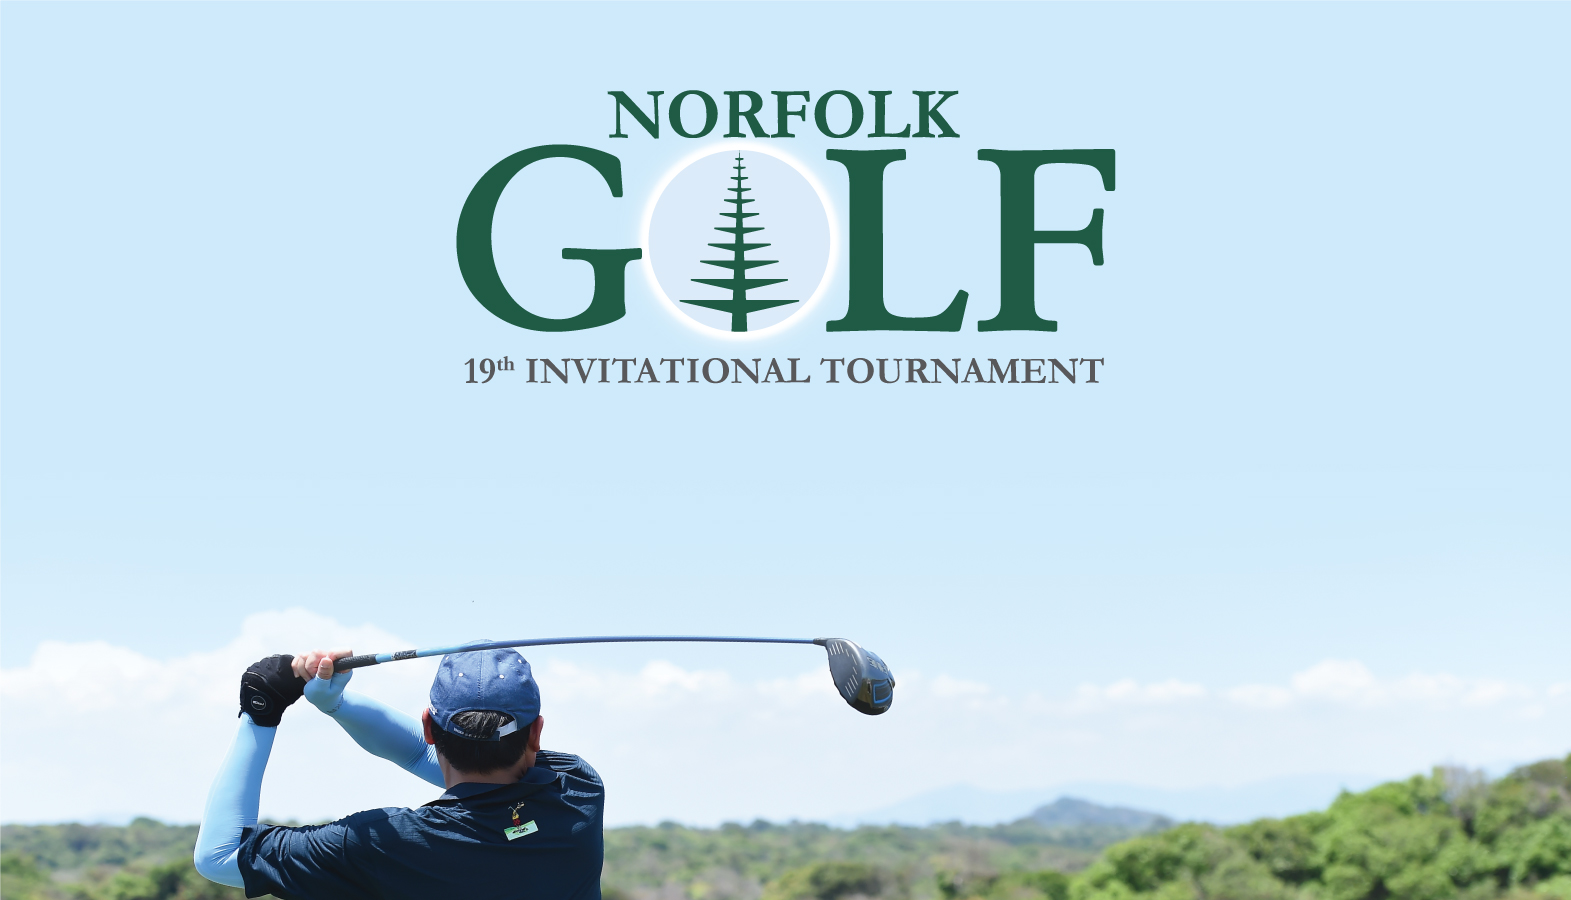 The 19th Norfolk Invitational Golf Tournament in 2018